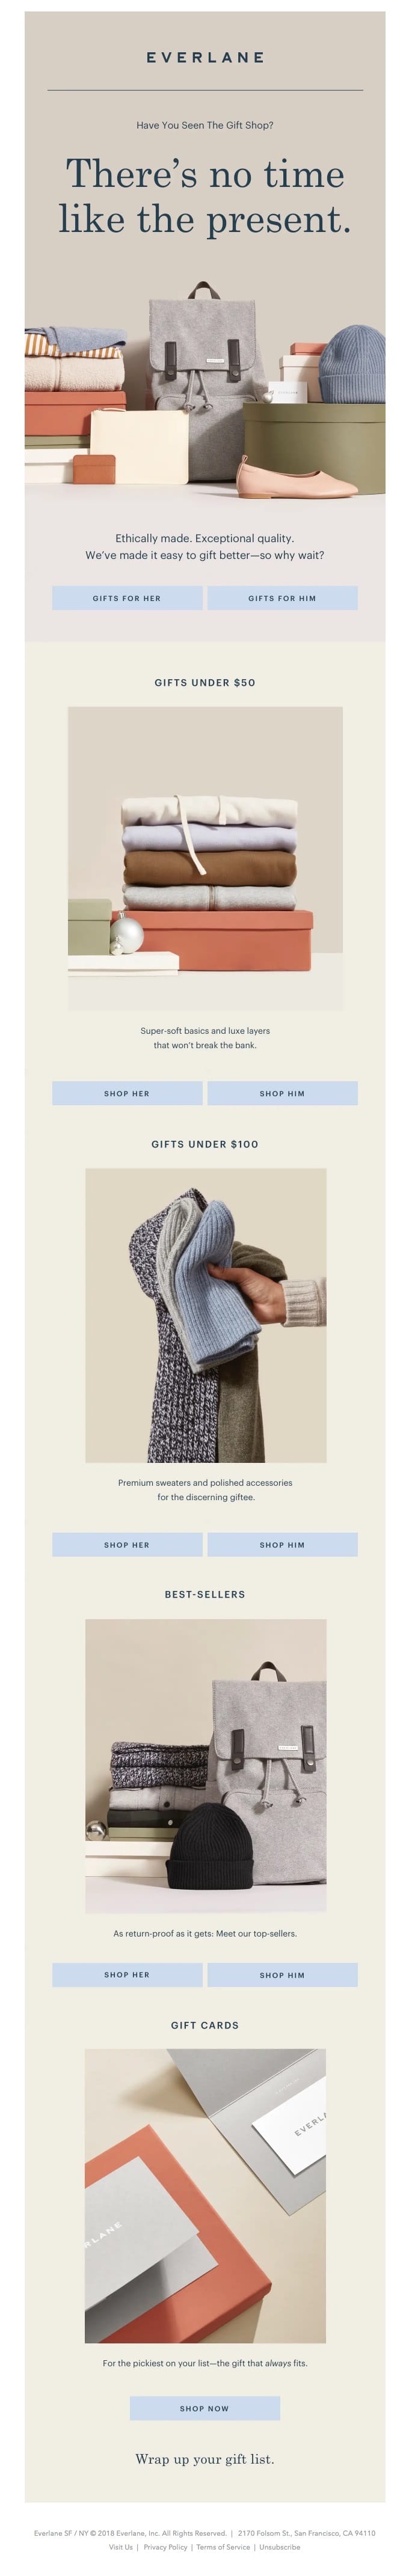 Everlane’s email newsletter offers up options to help shoppers “Knock out that gift list,” and is full of fall favorites curated for both him and her.